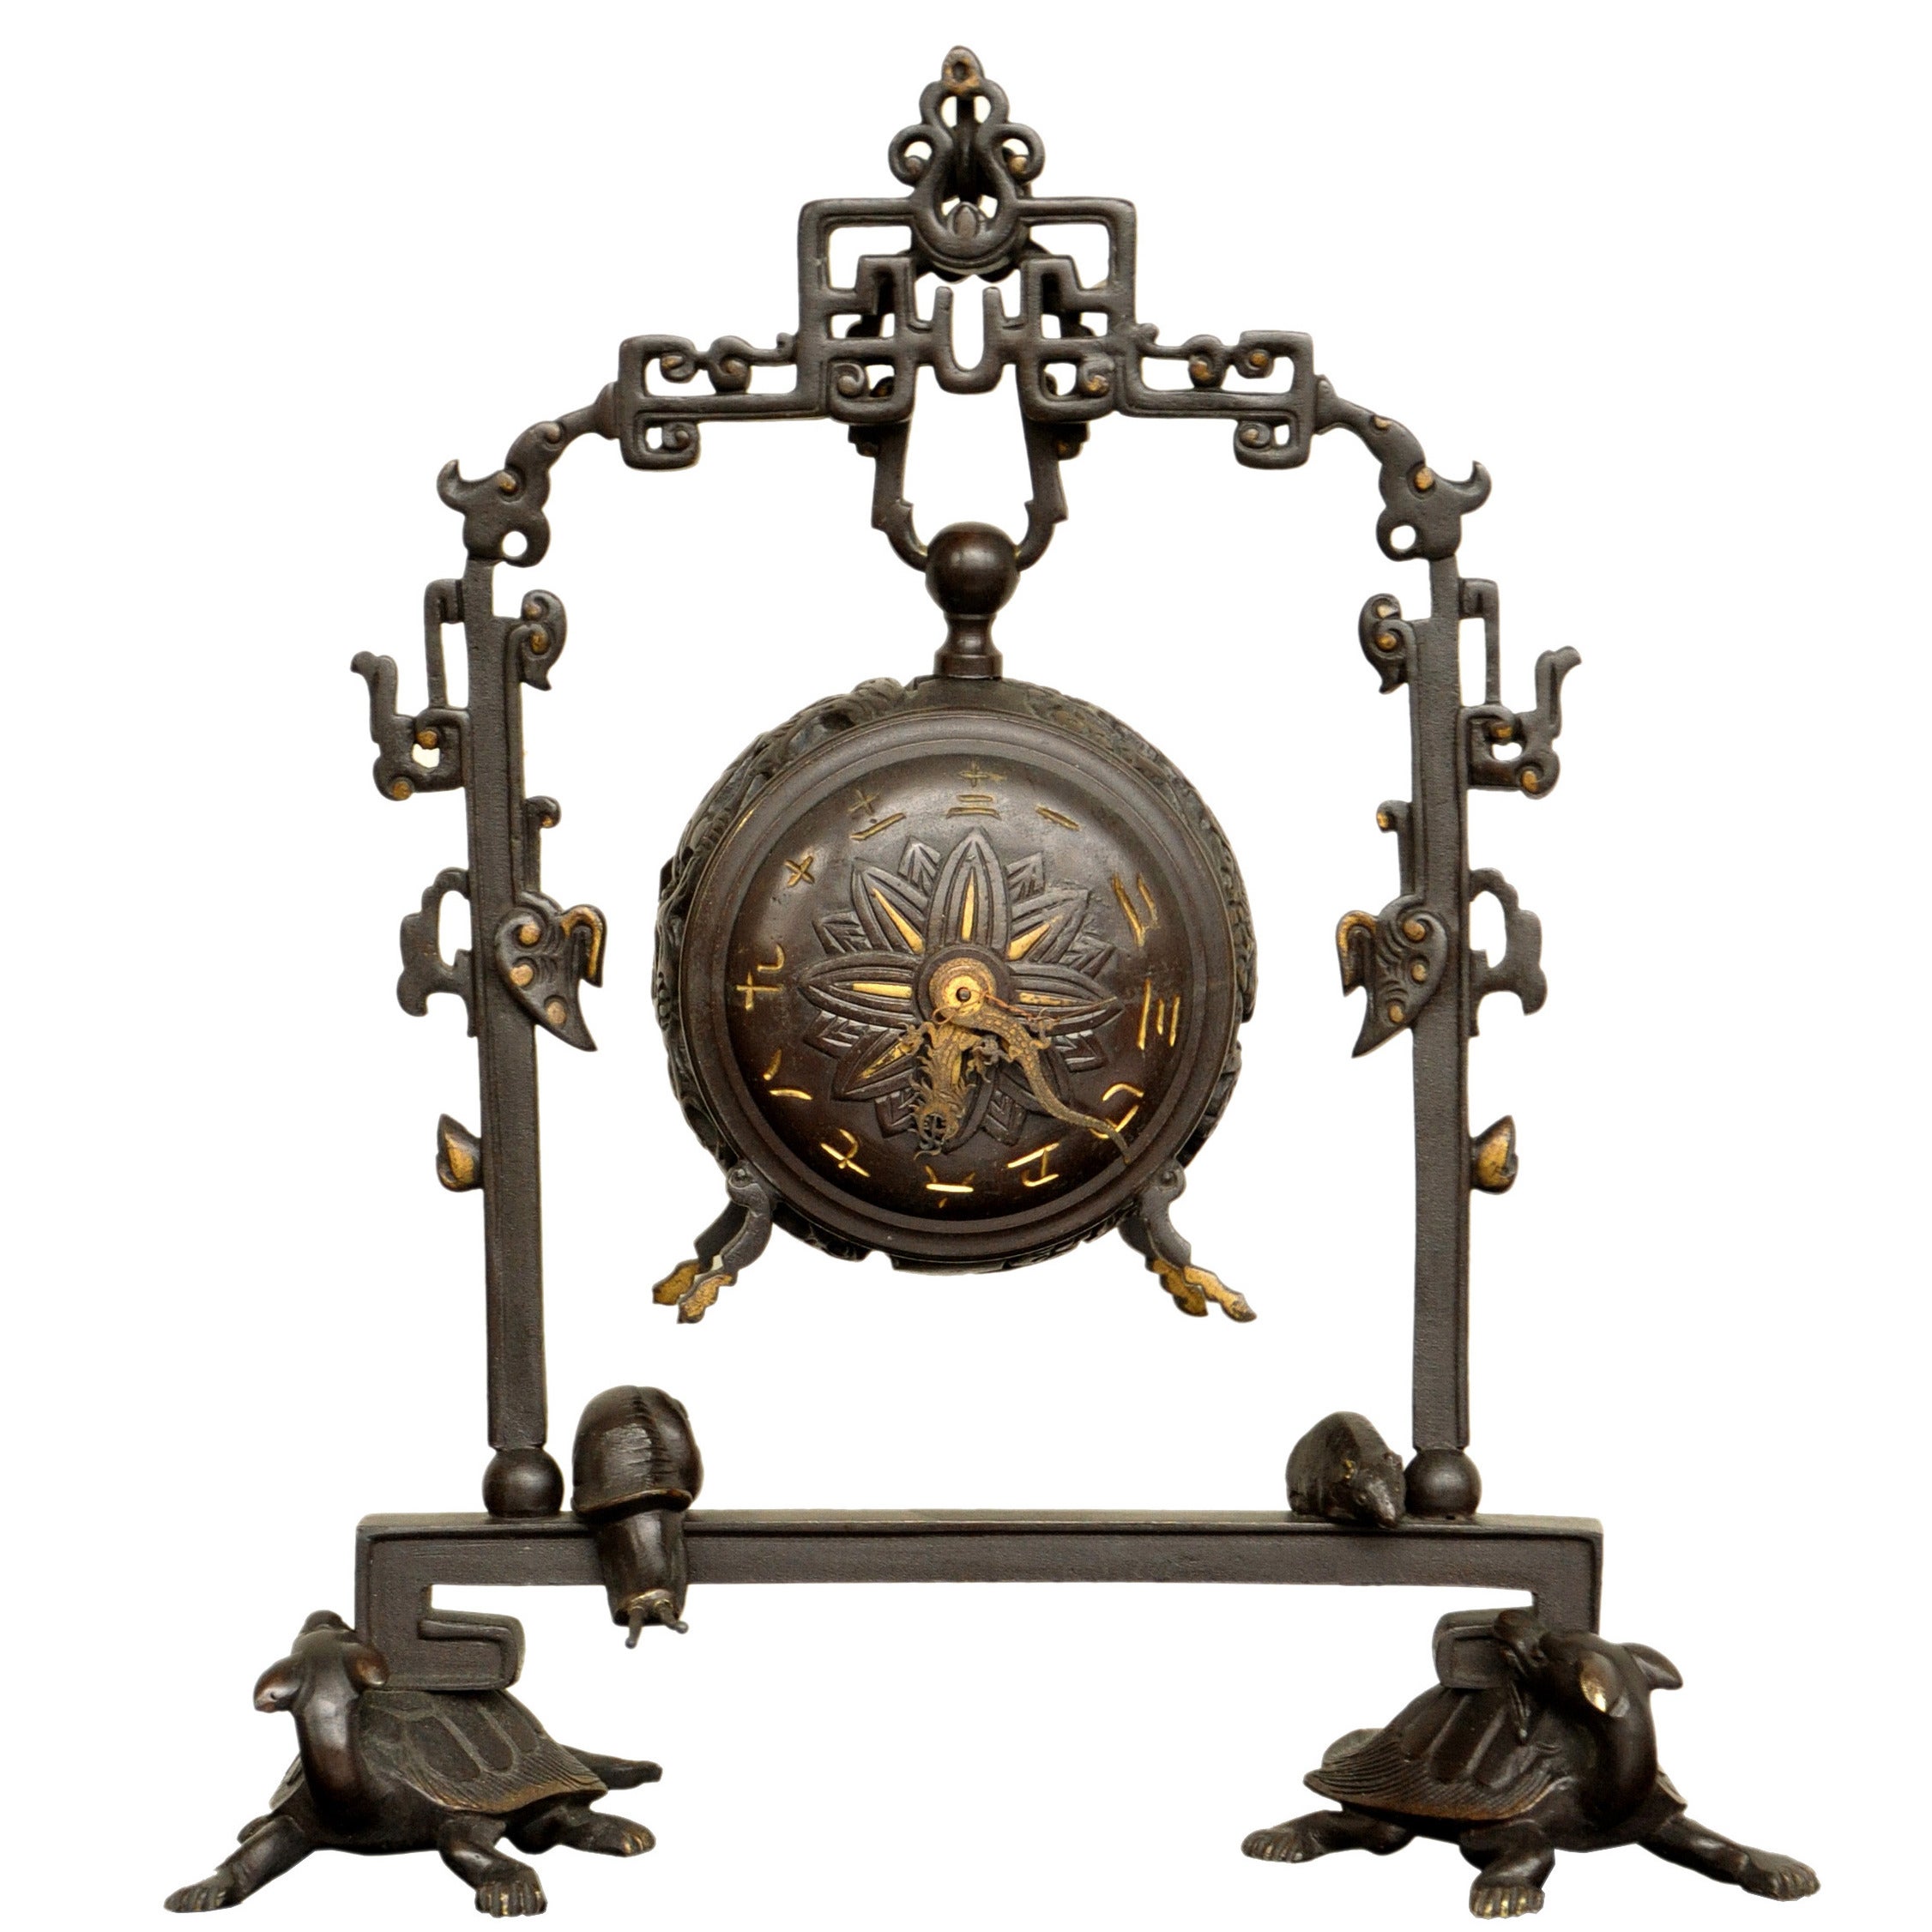 Chinese-style portico clock decorated with turtles, 19th c.